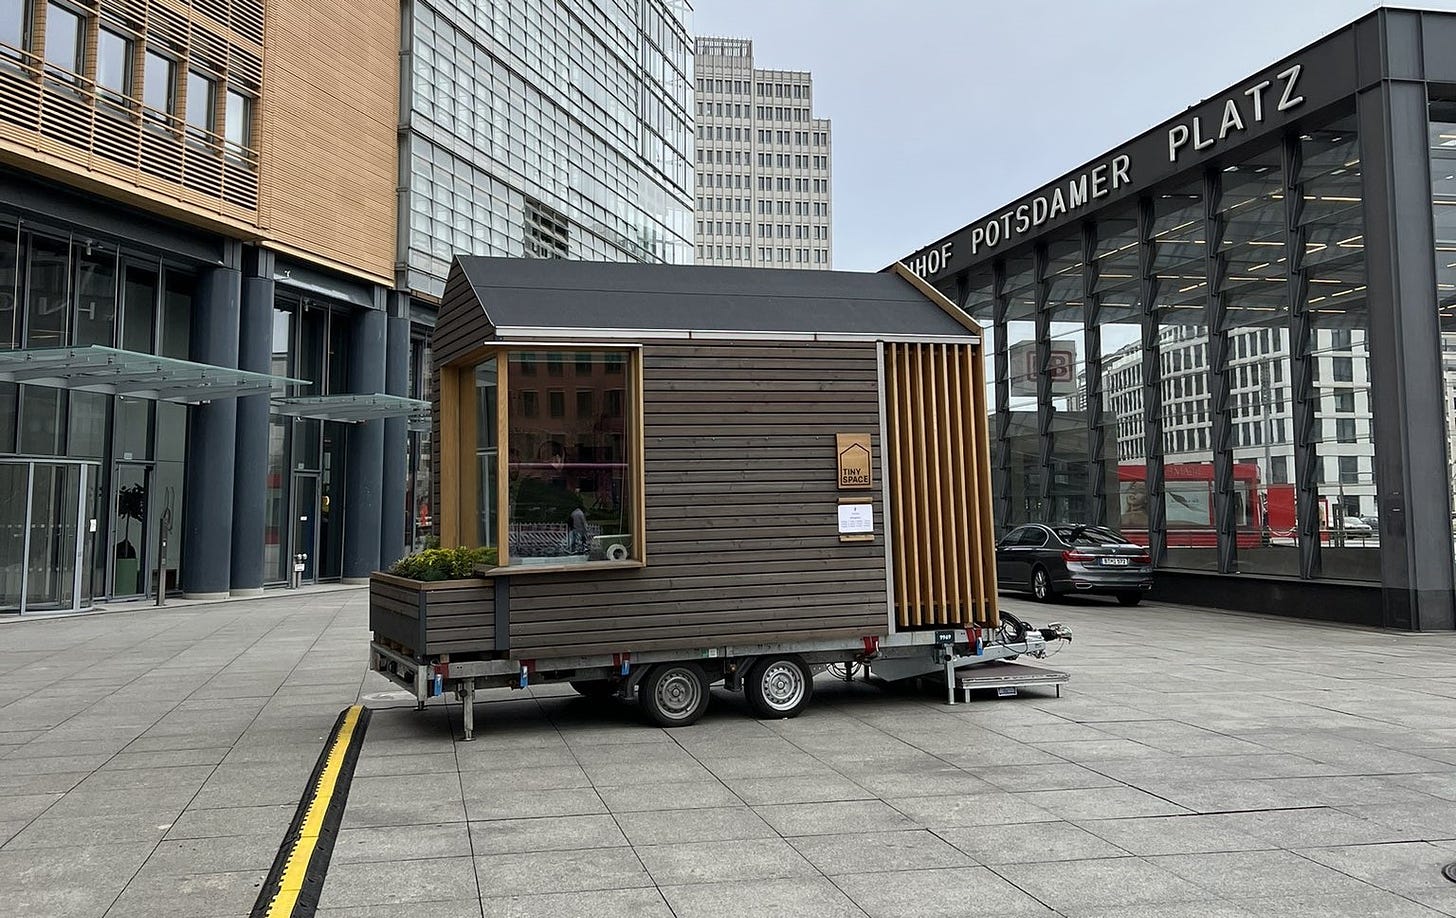 TinyHouse at Berlinale